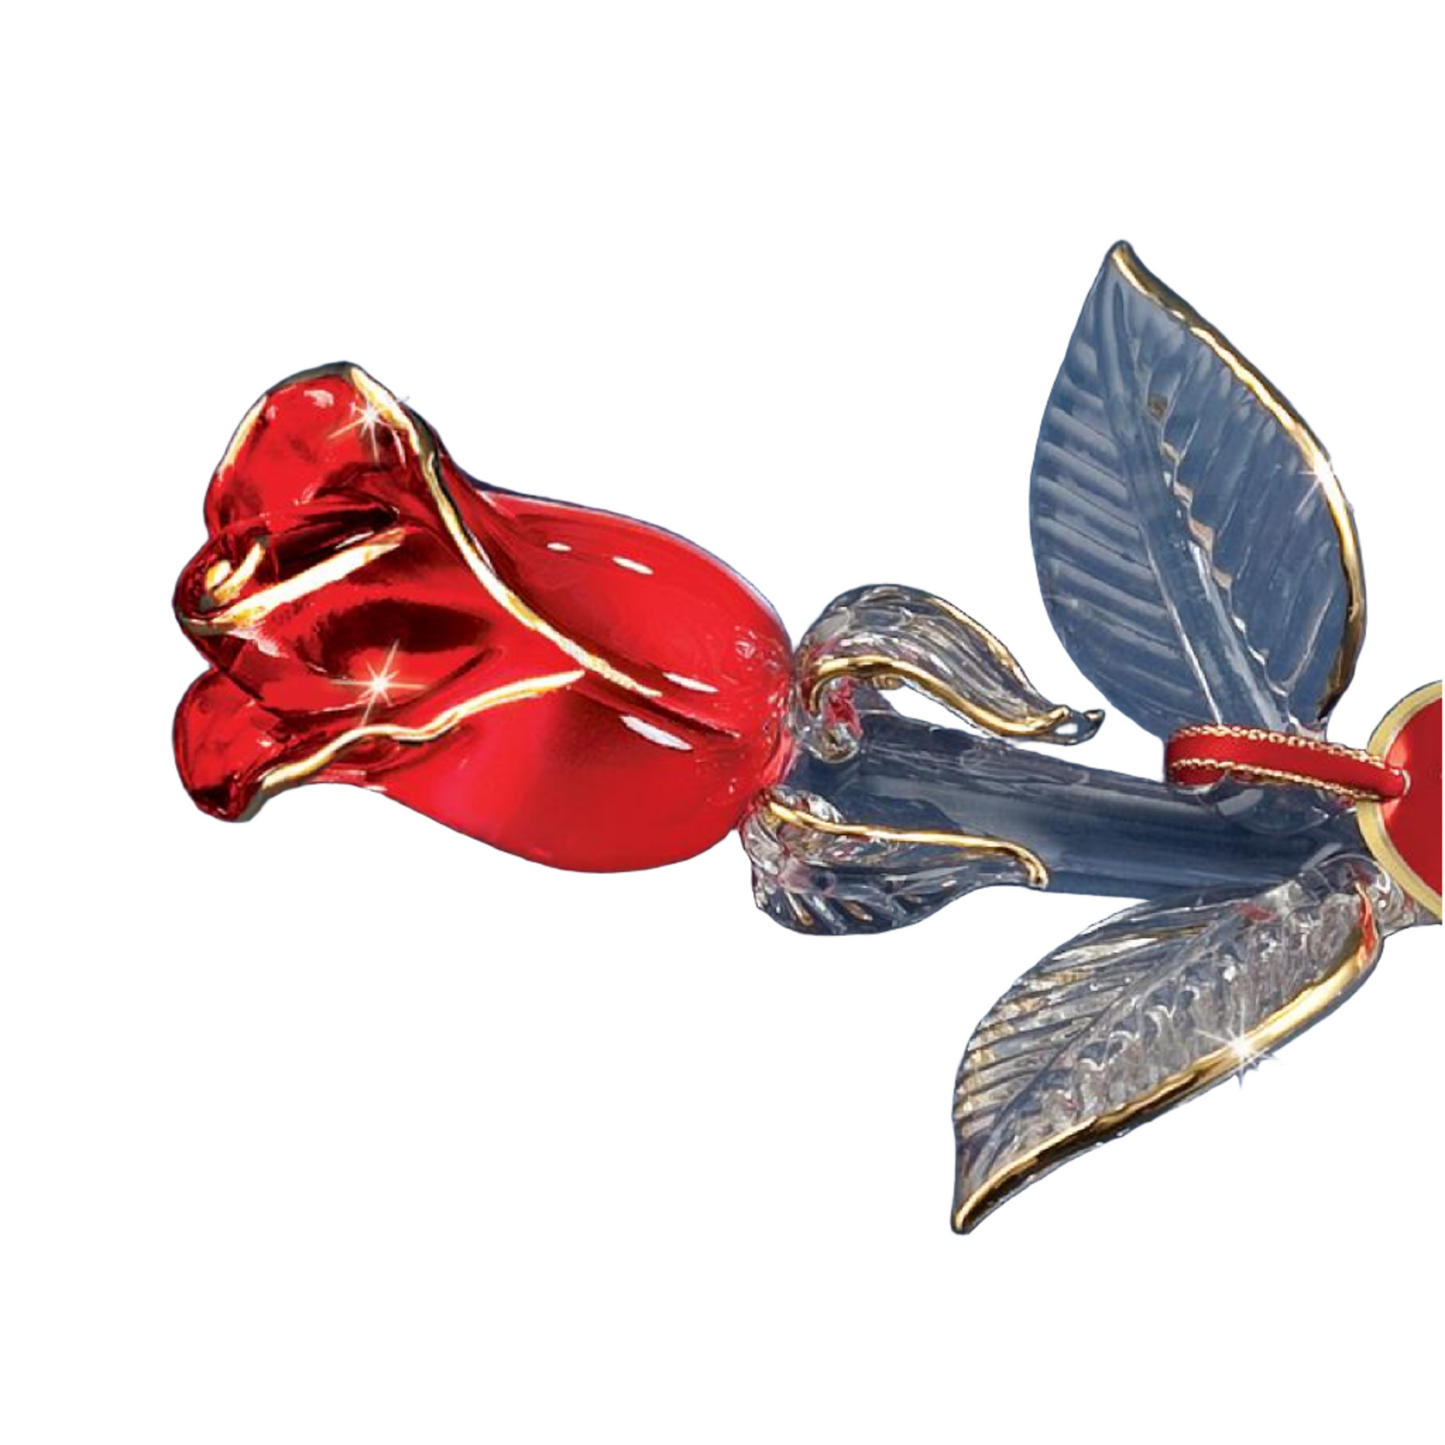 Glass Baron Rose Figurine - Red and Gold